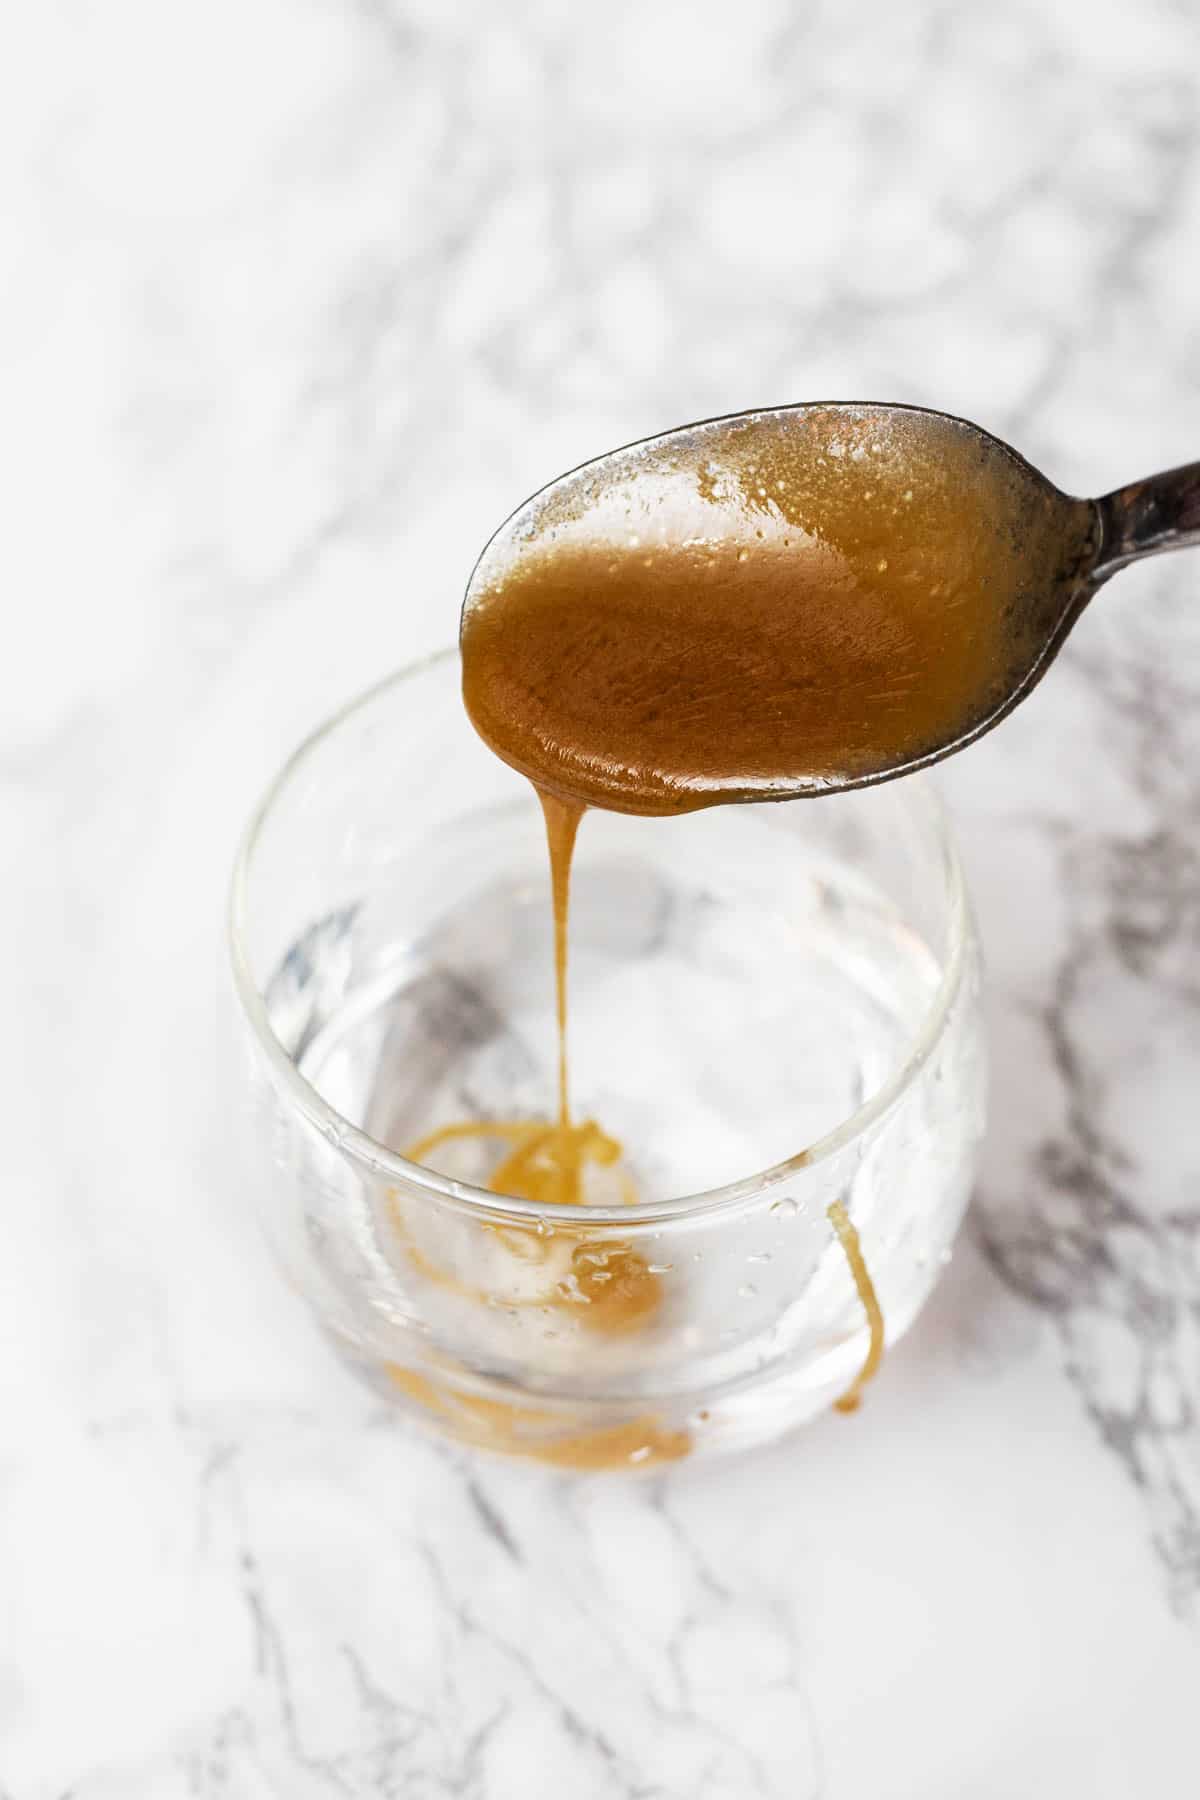 Caramel dripping off metal spoon into glass of water